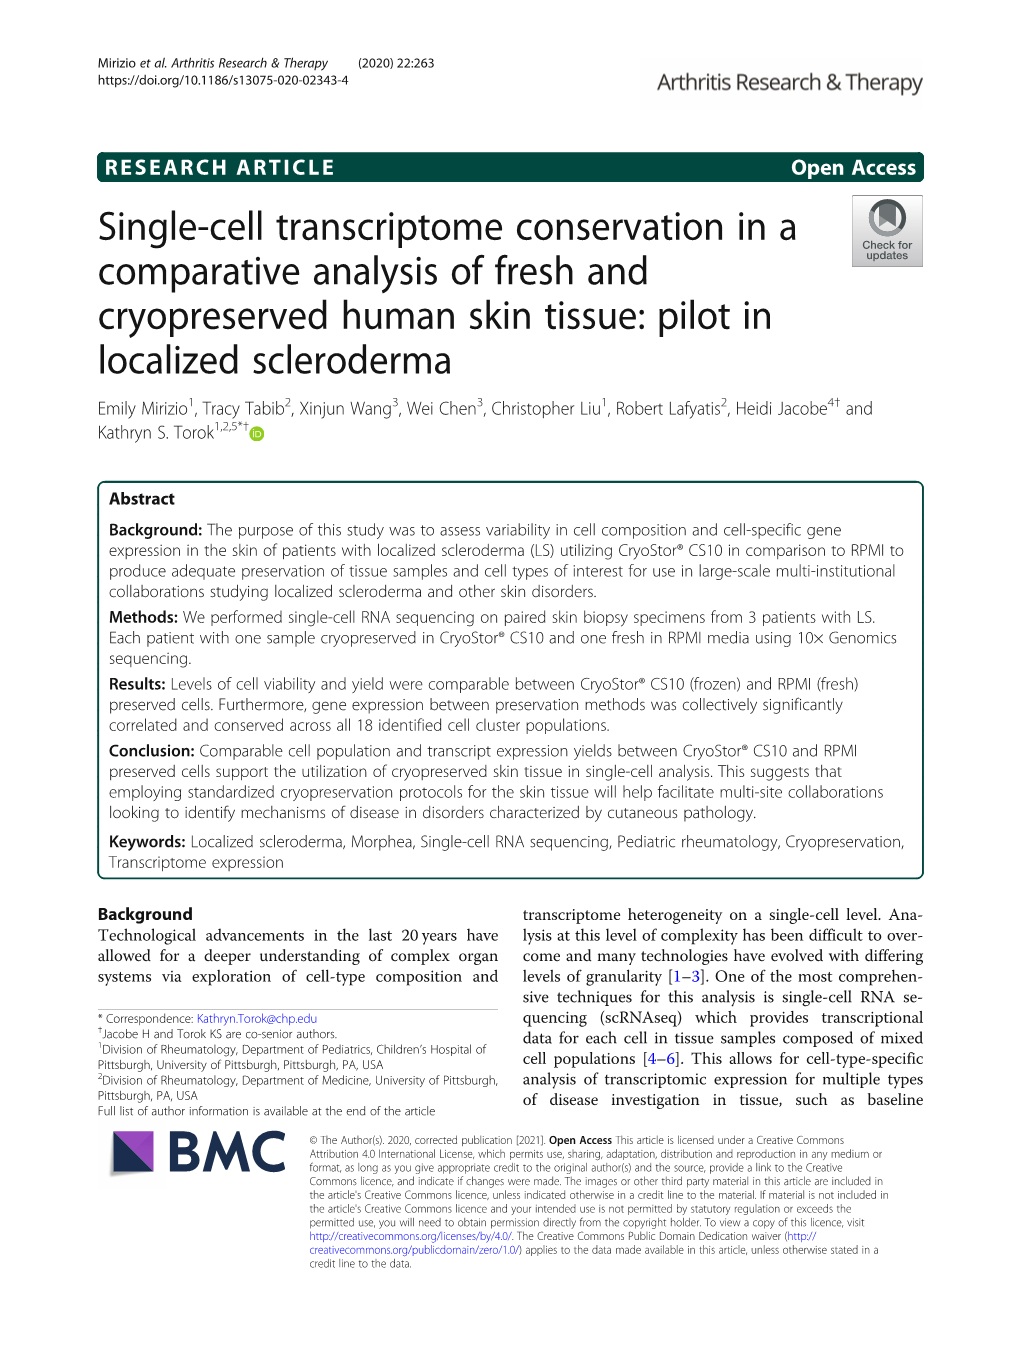 Single-Cell Transcriptome Conservation in a Comparative Analysis of Fresh